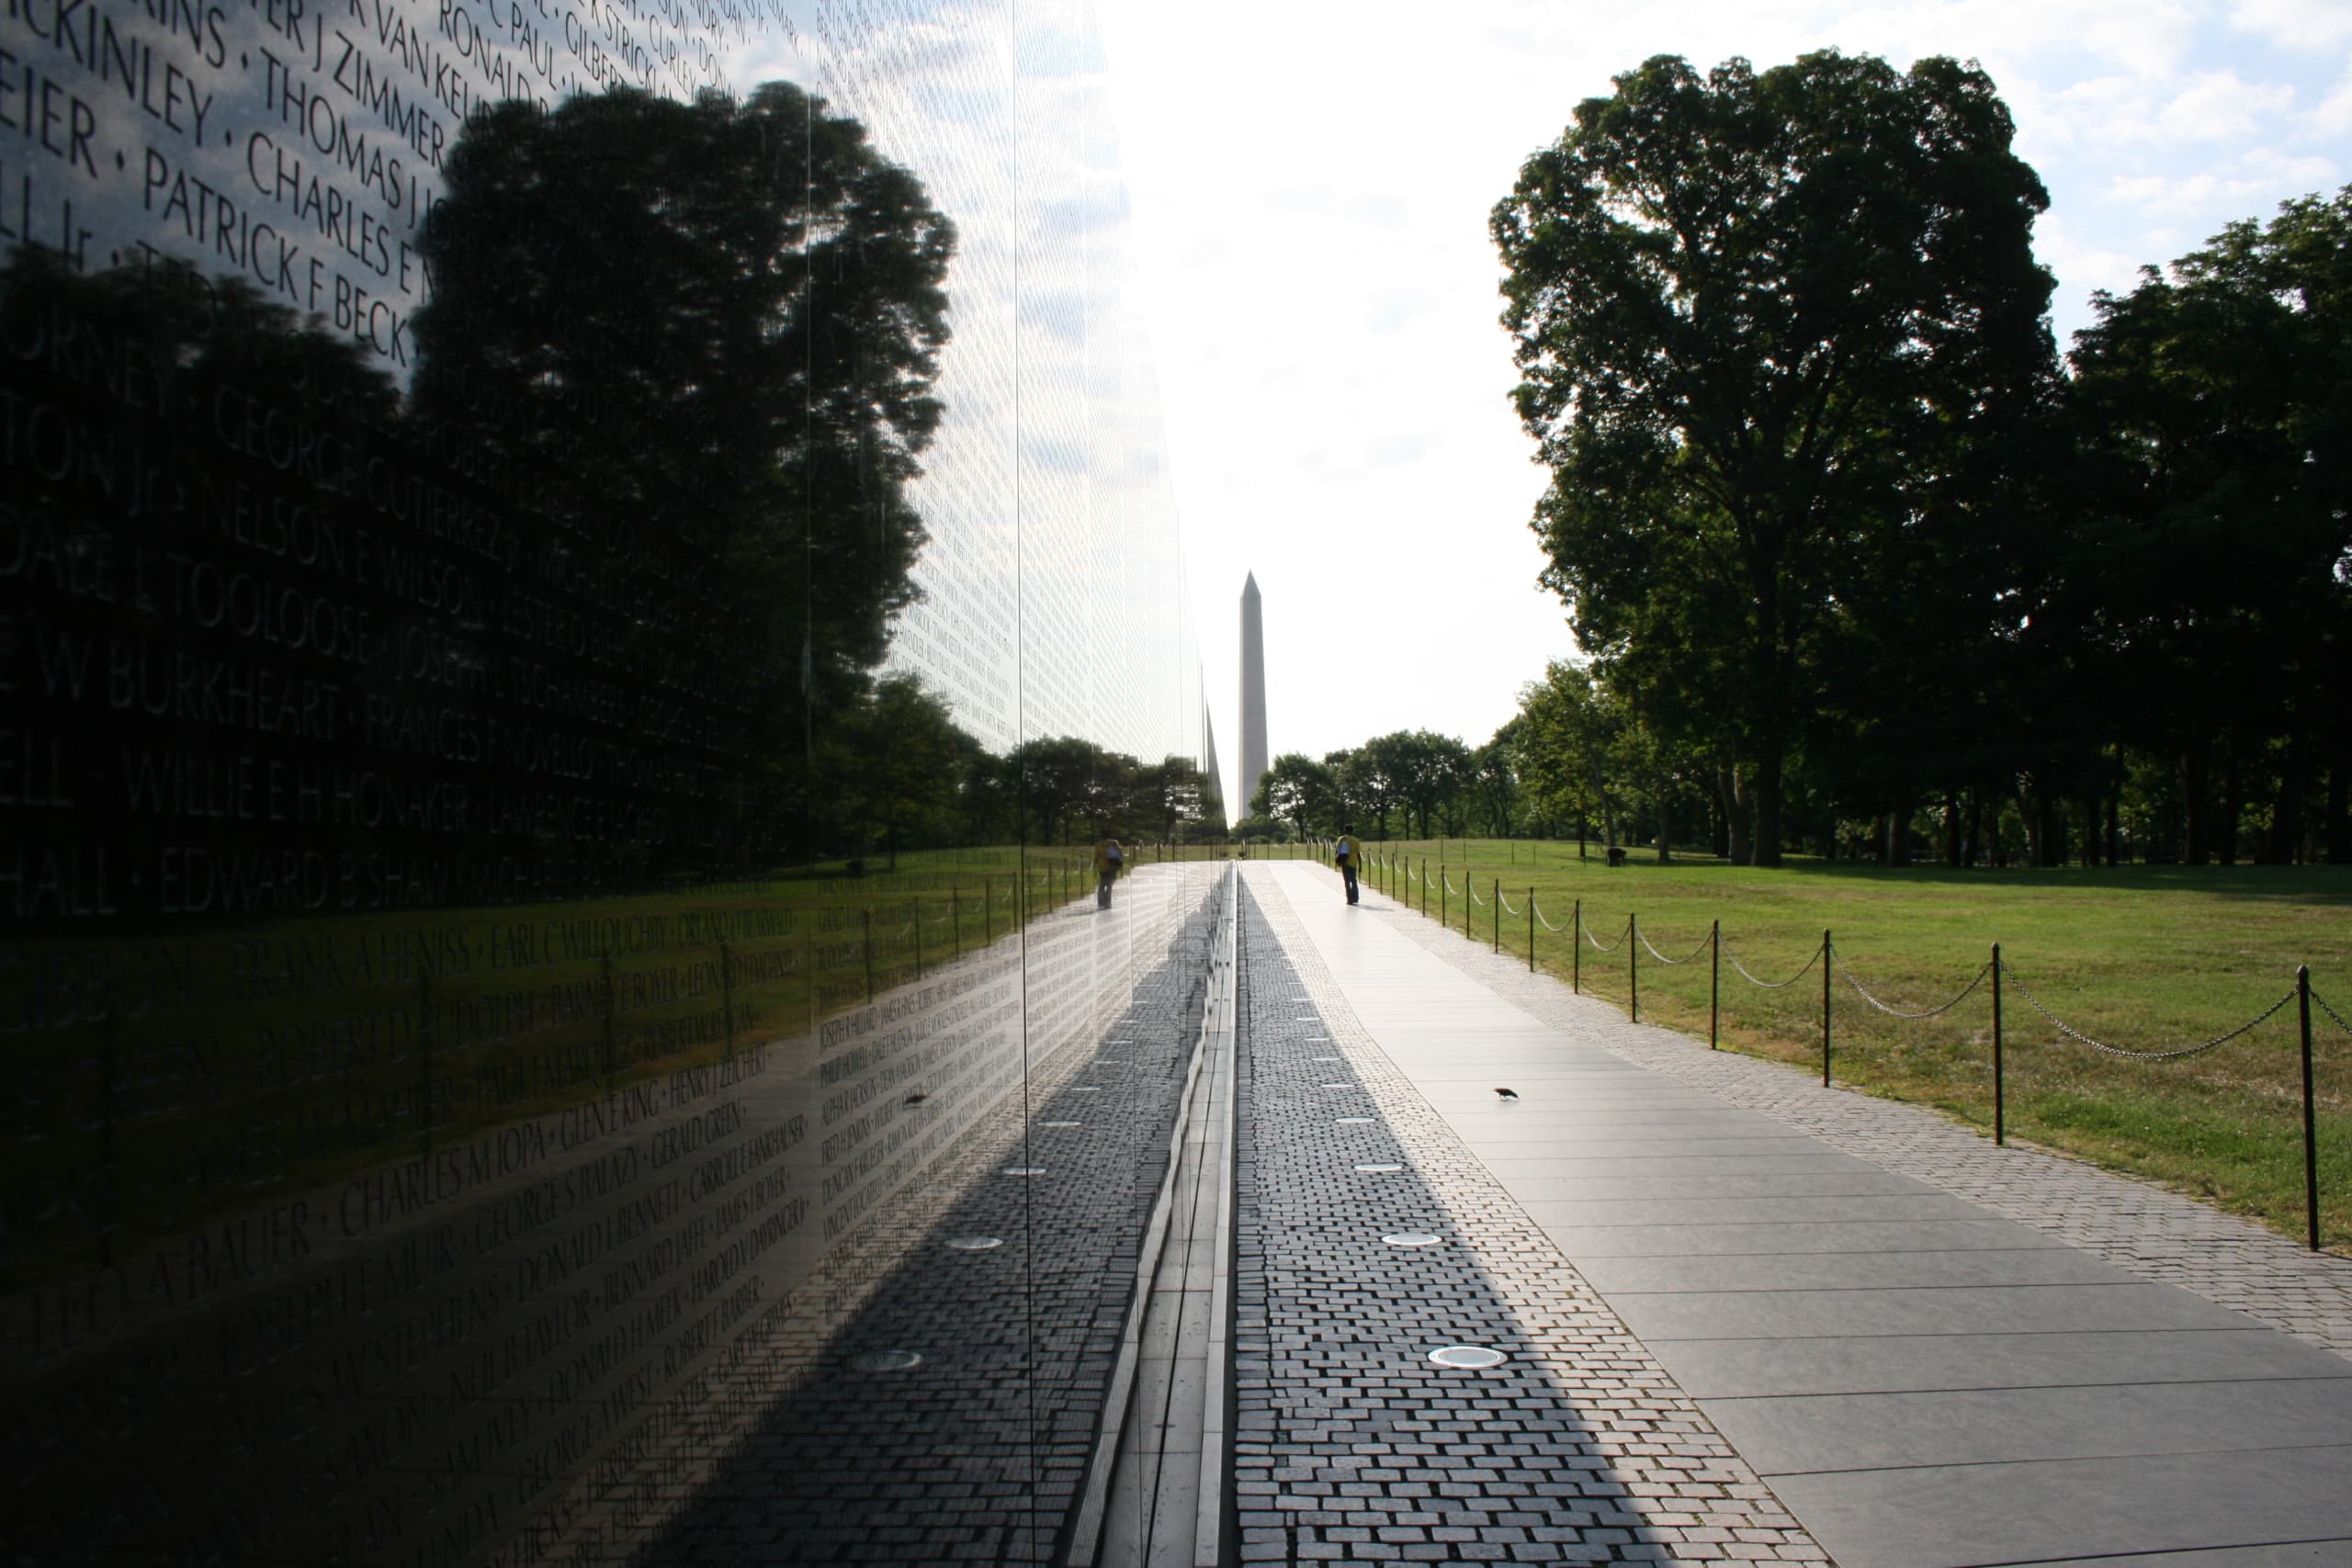 The Vietnam Veterans Memorial Wall is a large granite wall engraved with the names of 58,318 Americans who lost their lives during the Vietnam War. The Washington Monument stands in the distant background.